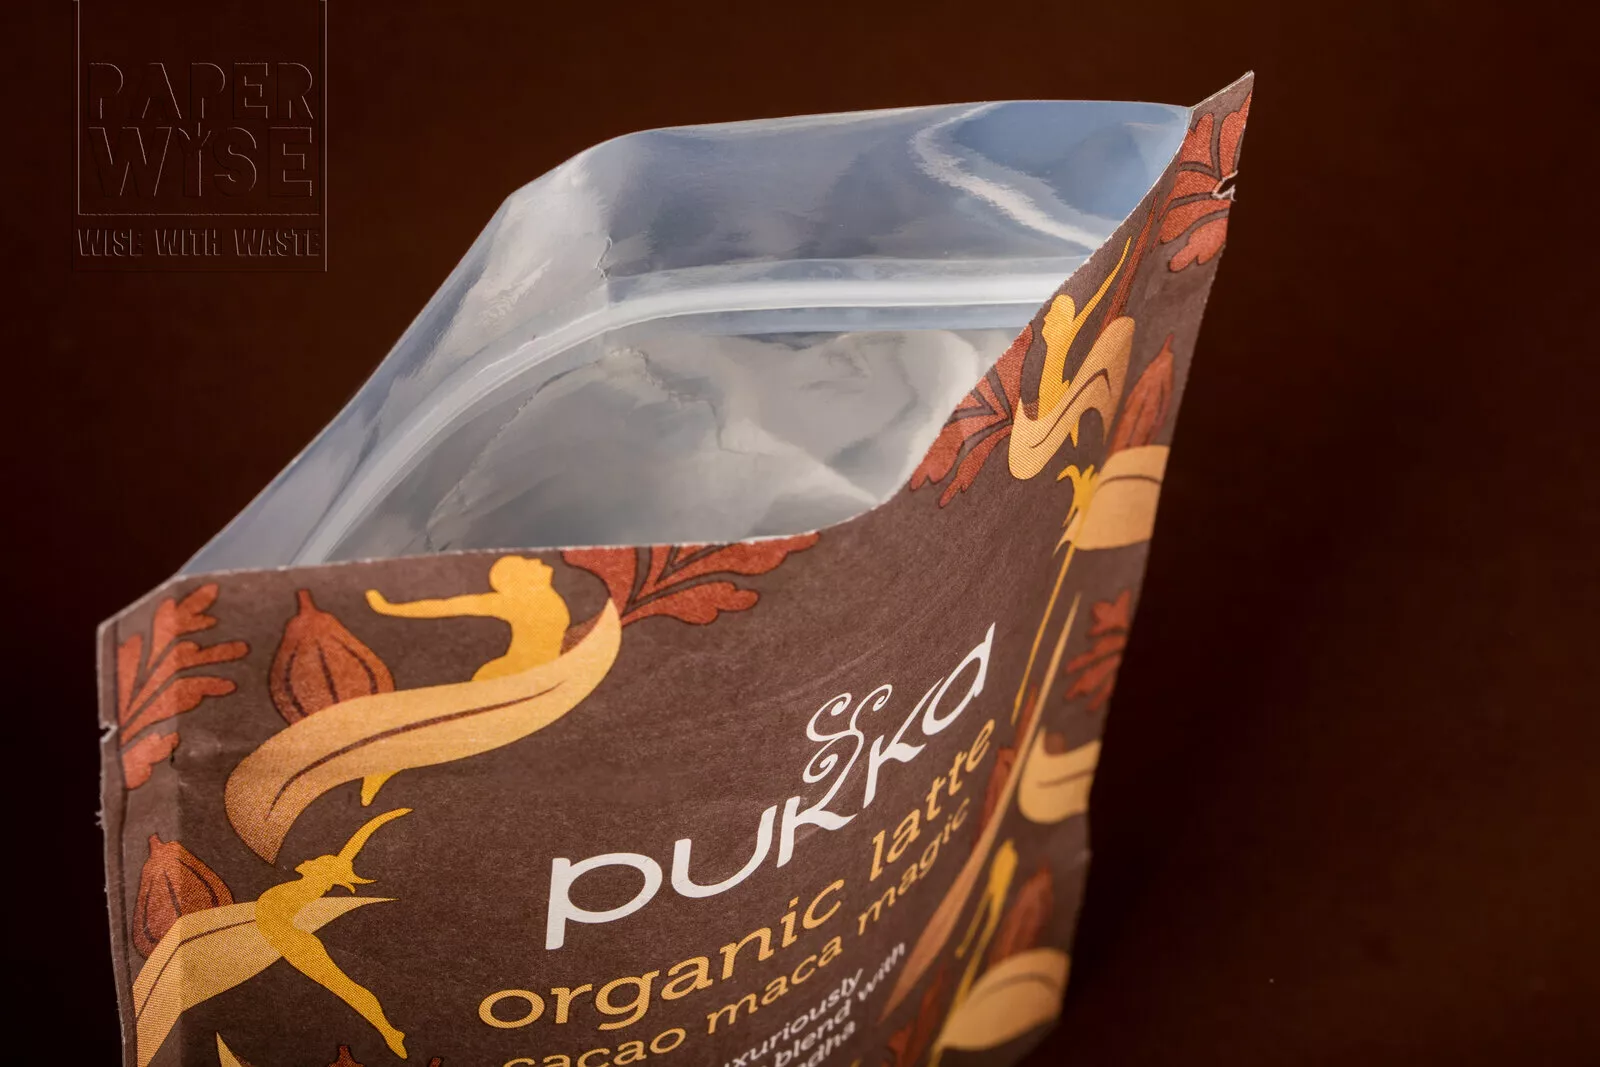 PaperWise sustainable paperorganic board pouch tea coffee latte environmentally responsible packaging Pukka